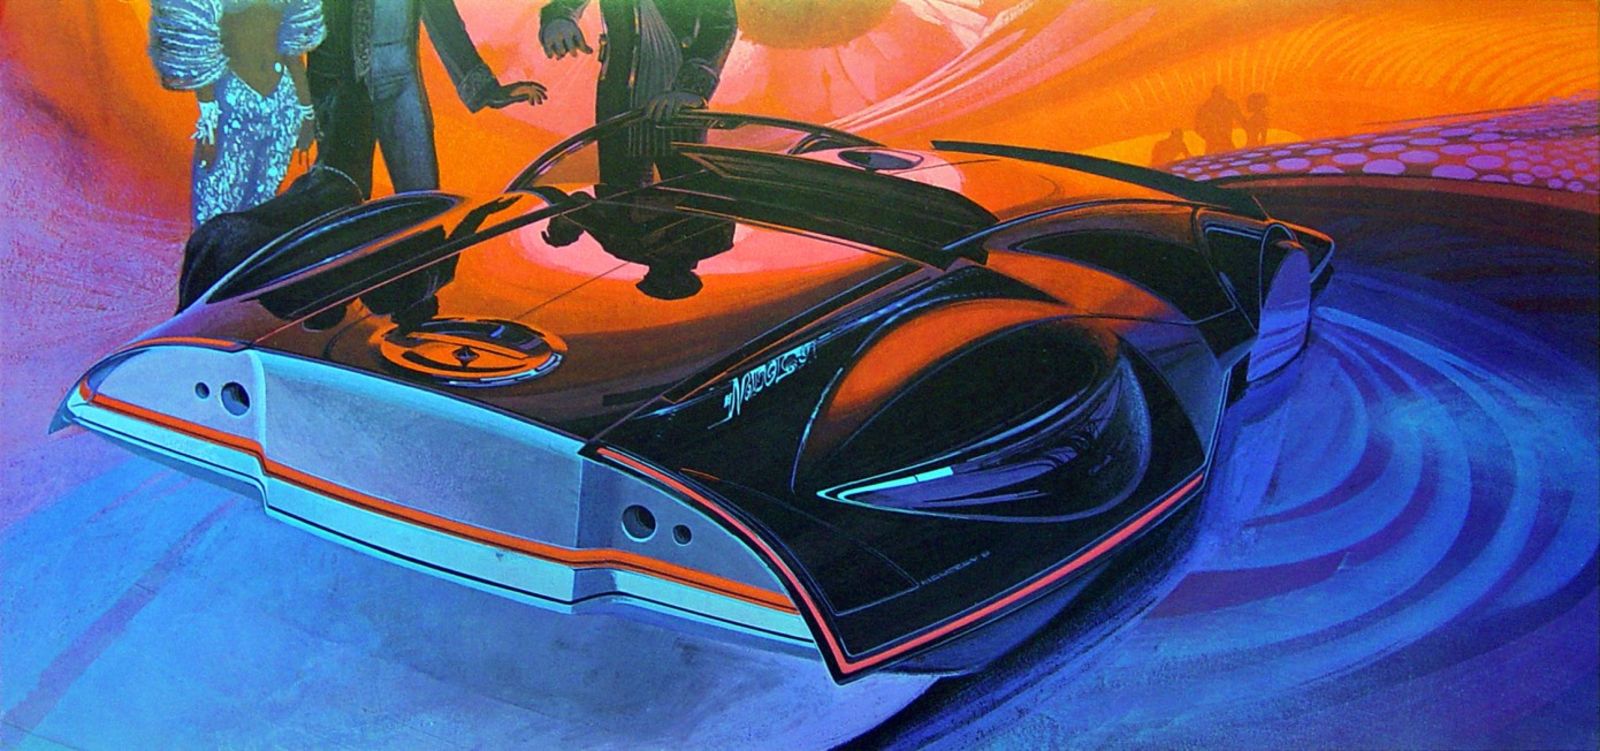 Illustration for article titled RIP, Syd Mead.